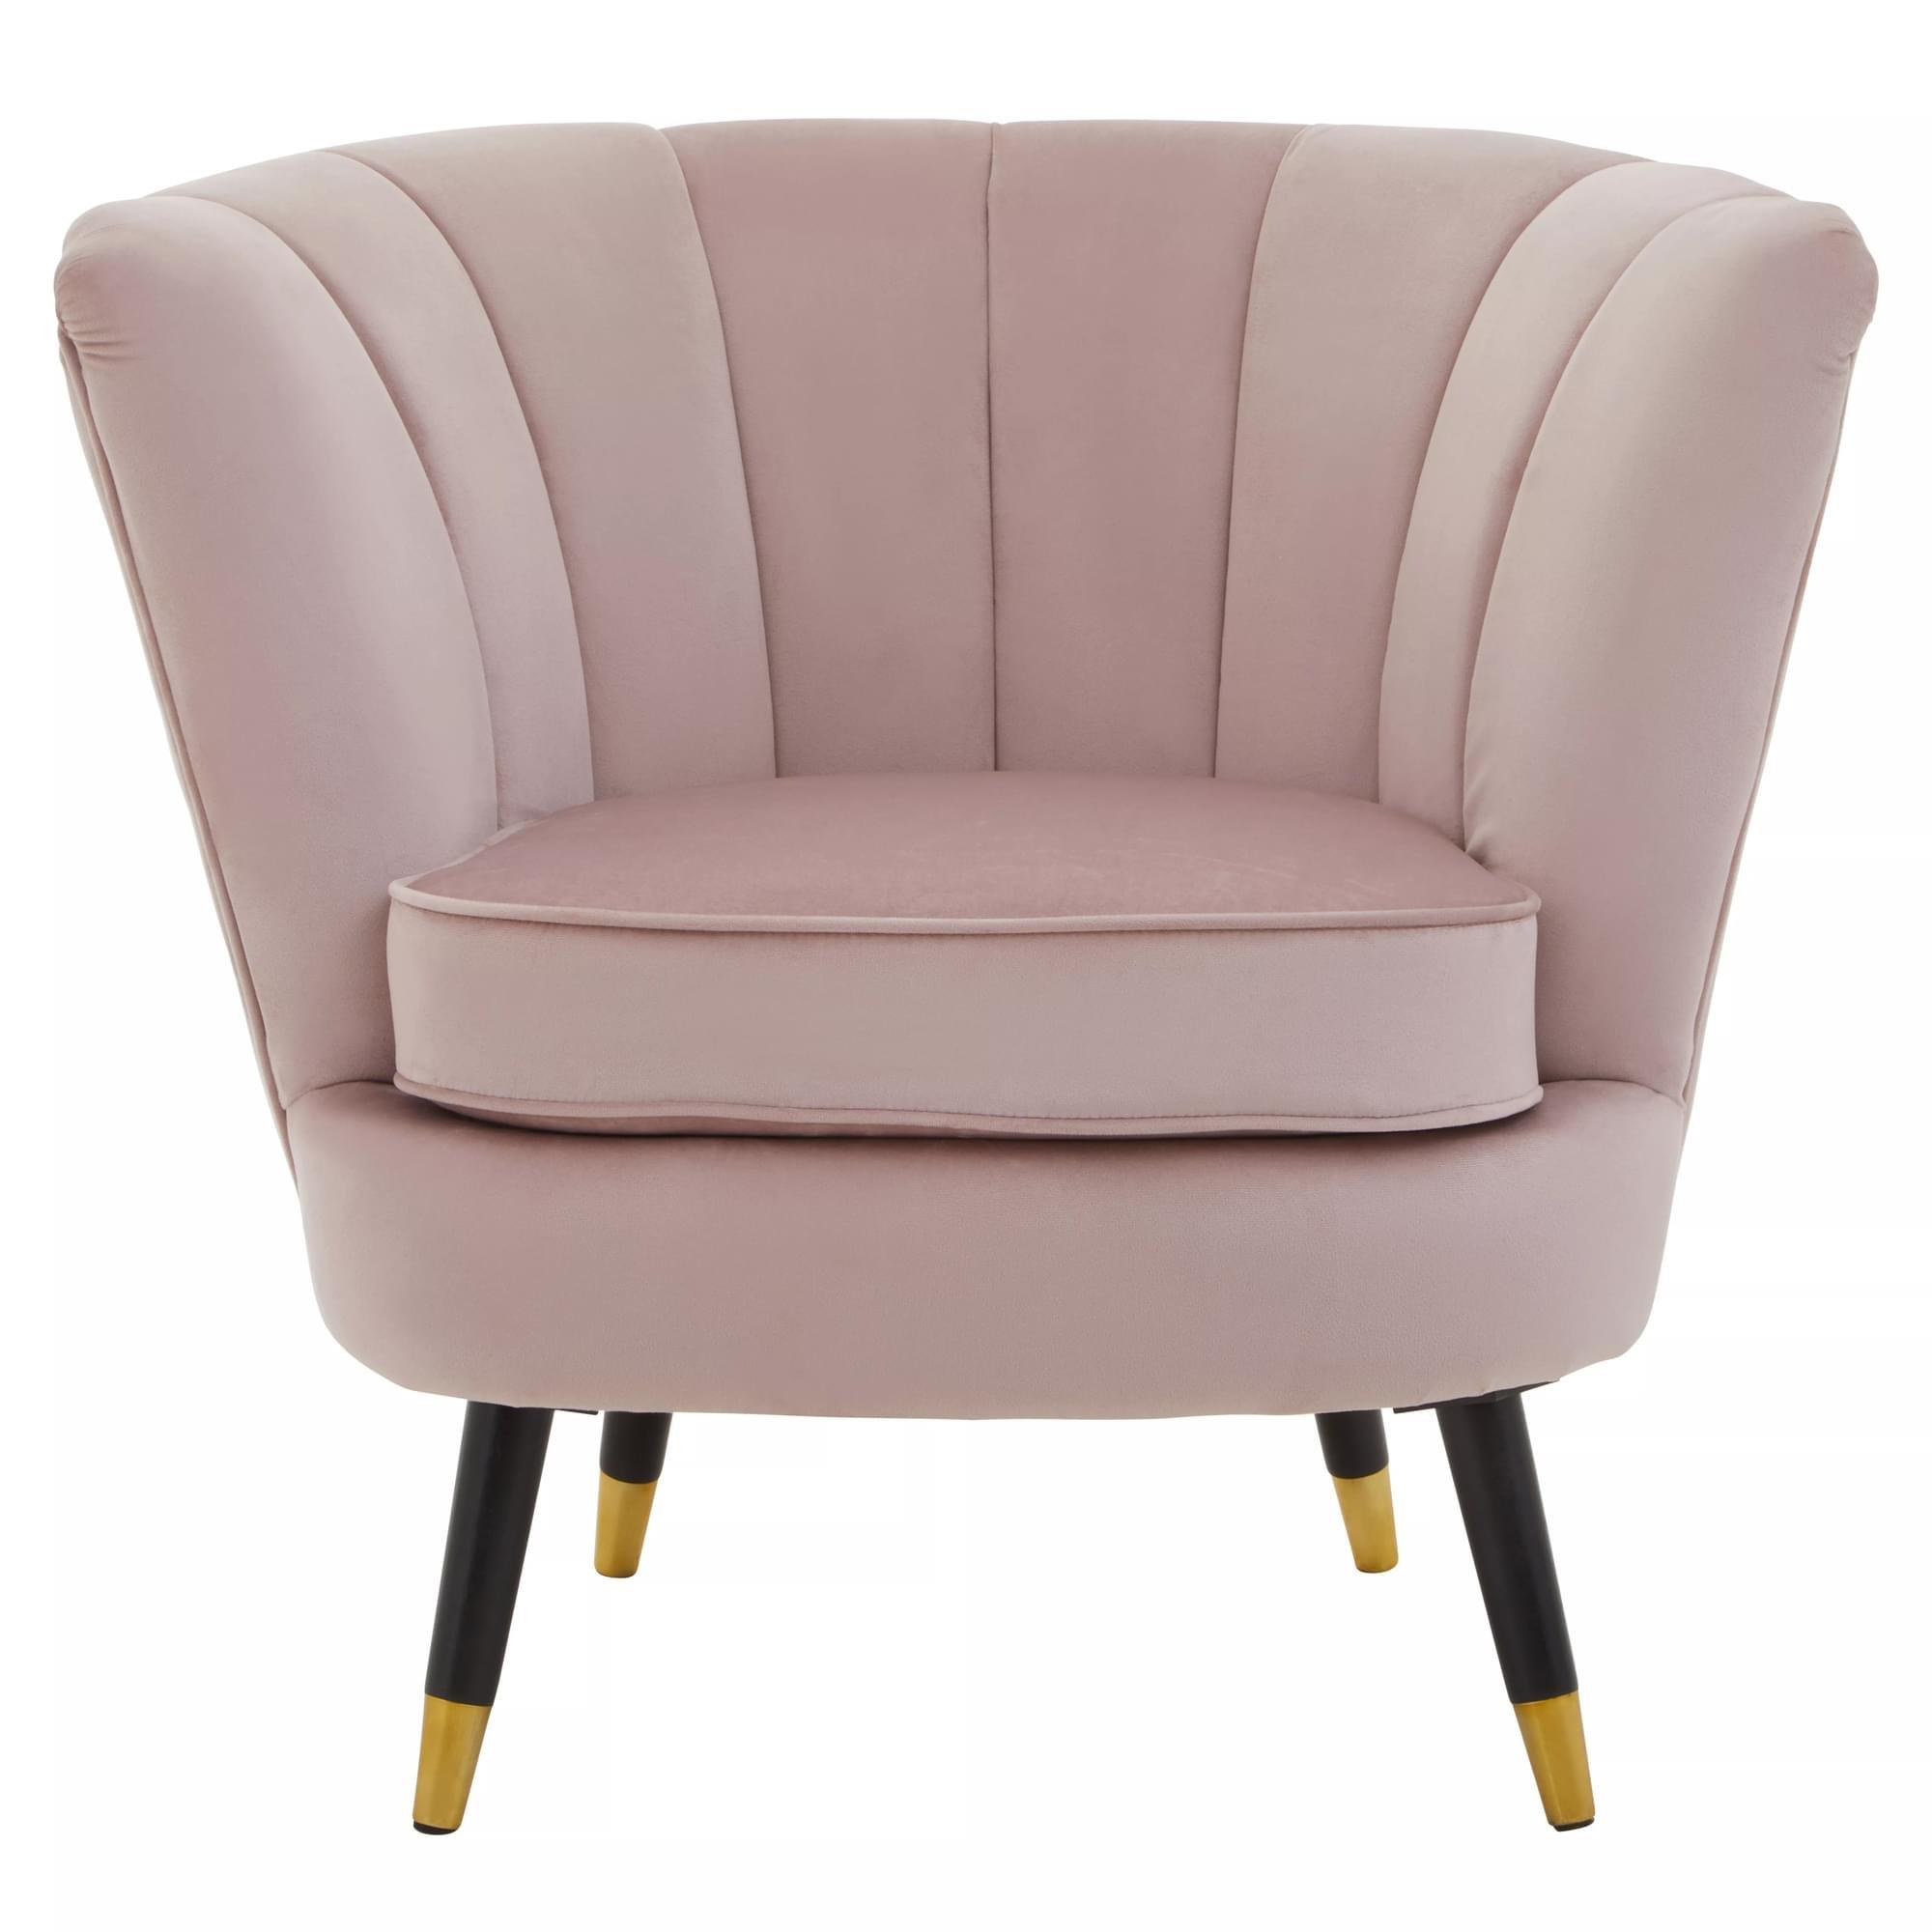 Interiors by Premier Loretta Dusky Pink Velvet Chair With Black Wood And Gold Finish Legs